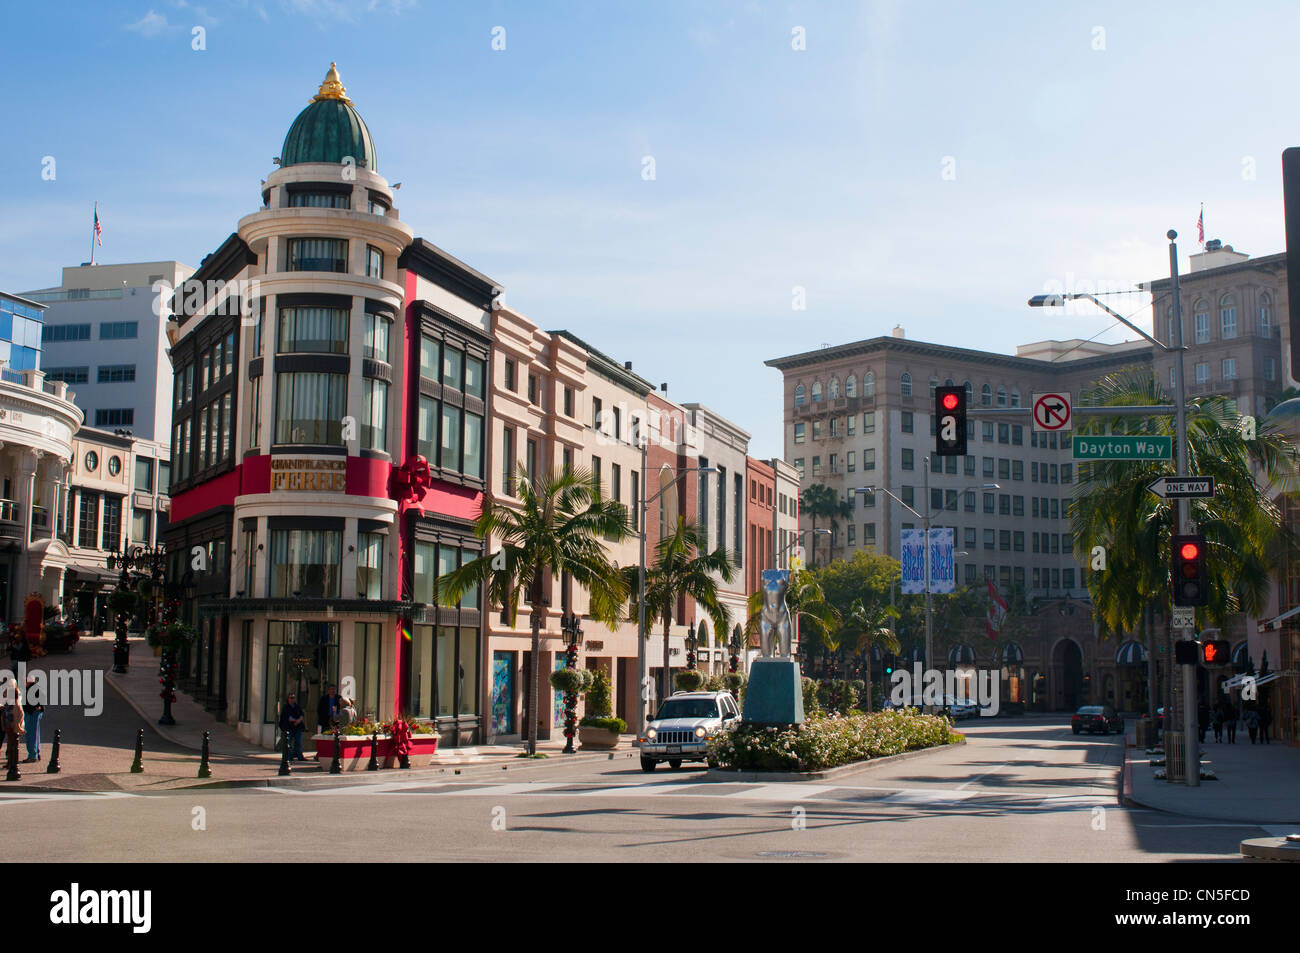 United States, California, Los Angeles, Beverly Hills, Rodeo Drive Banque D'Images